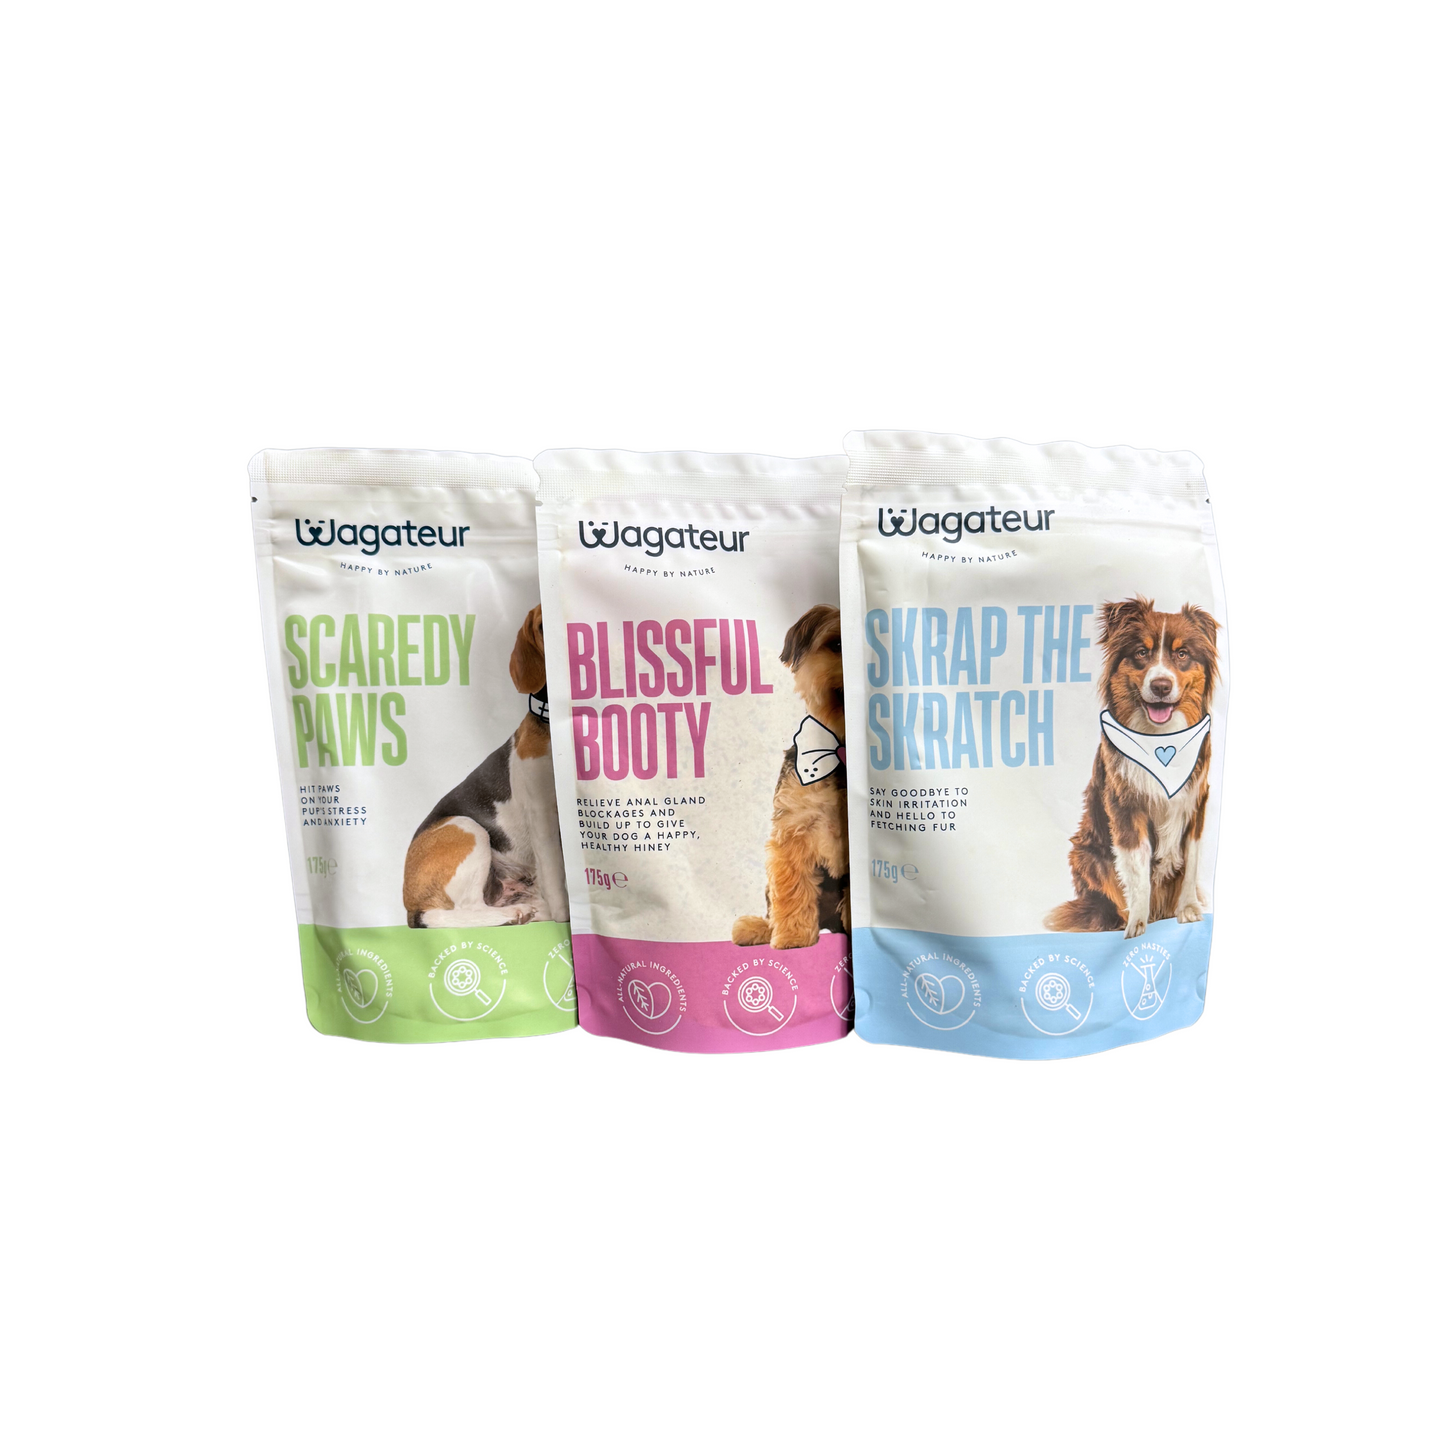 Complete Canine Care Multi-Pack - Save 20%